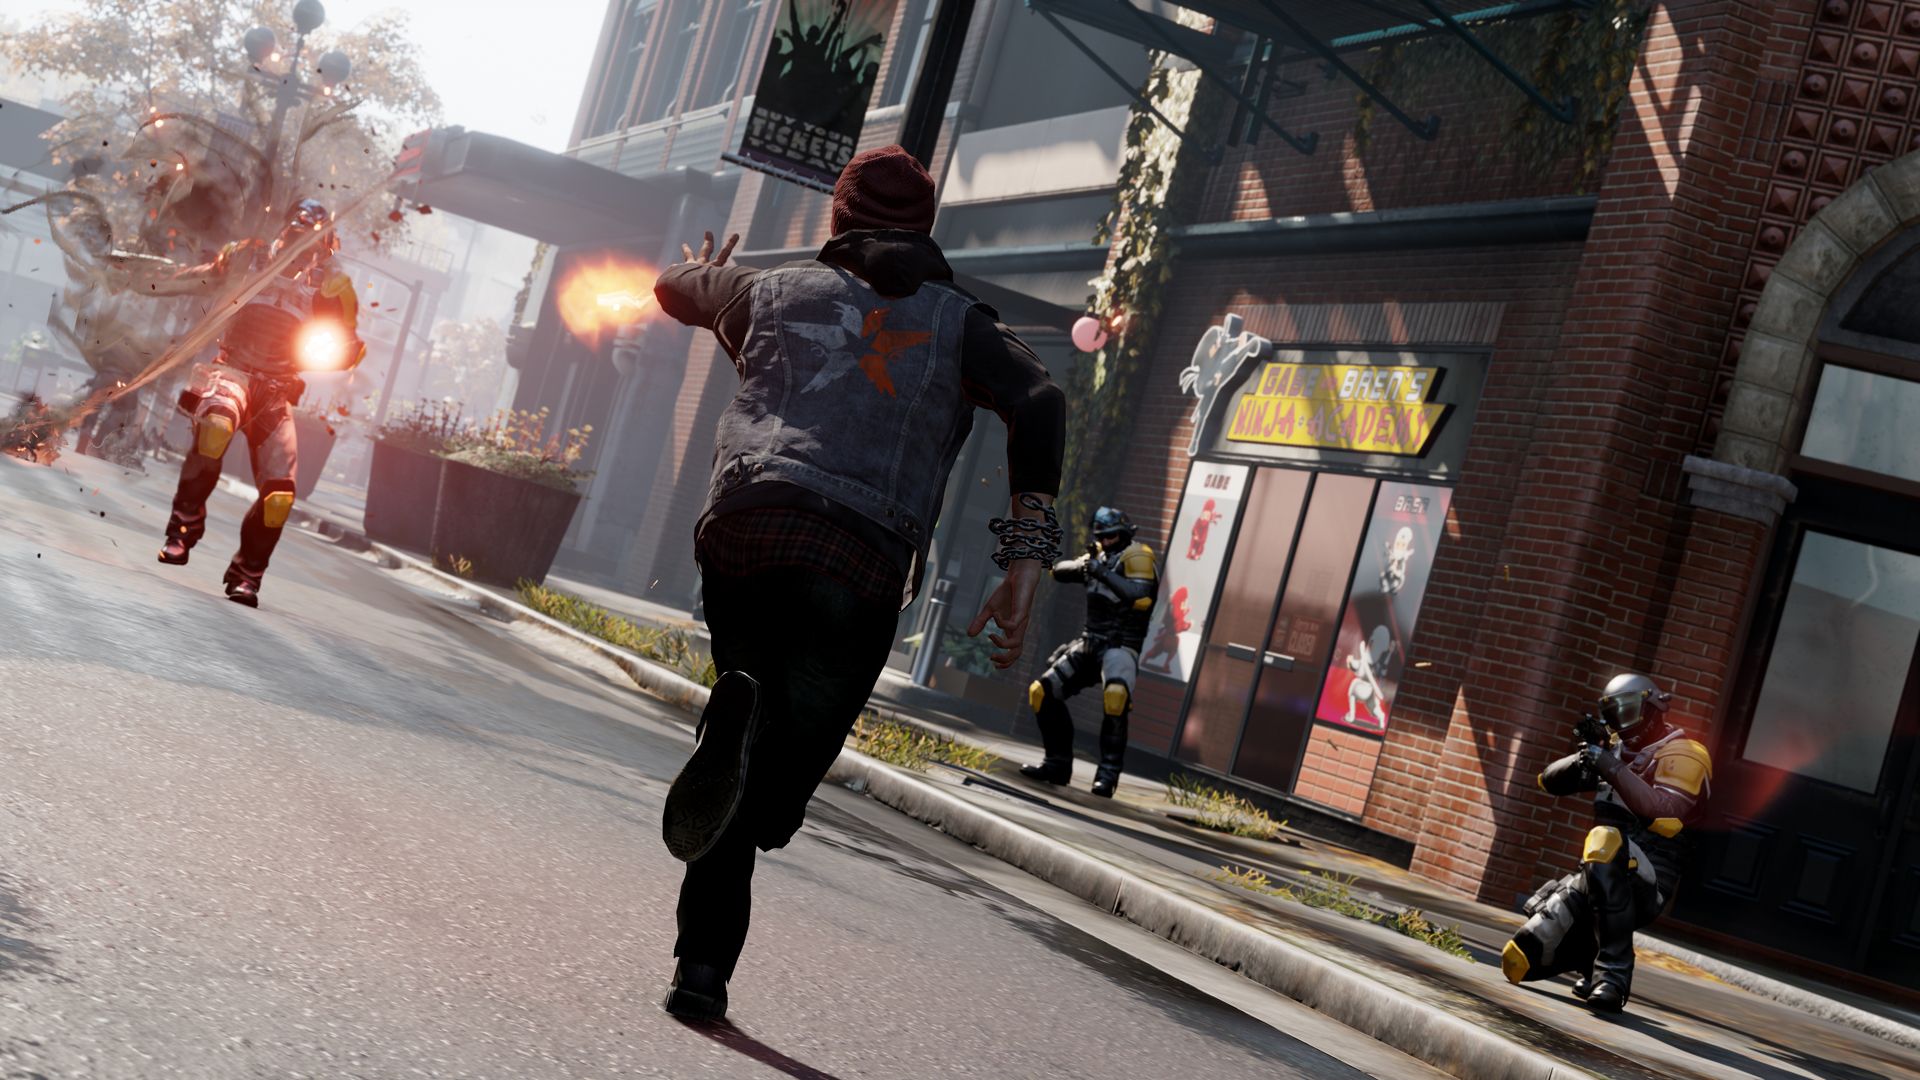 Infamous-Second-Son-on-PS4-Gets-Fresh-Batch-of-Screenshots-2.jpg